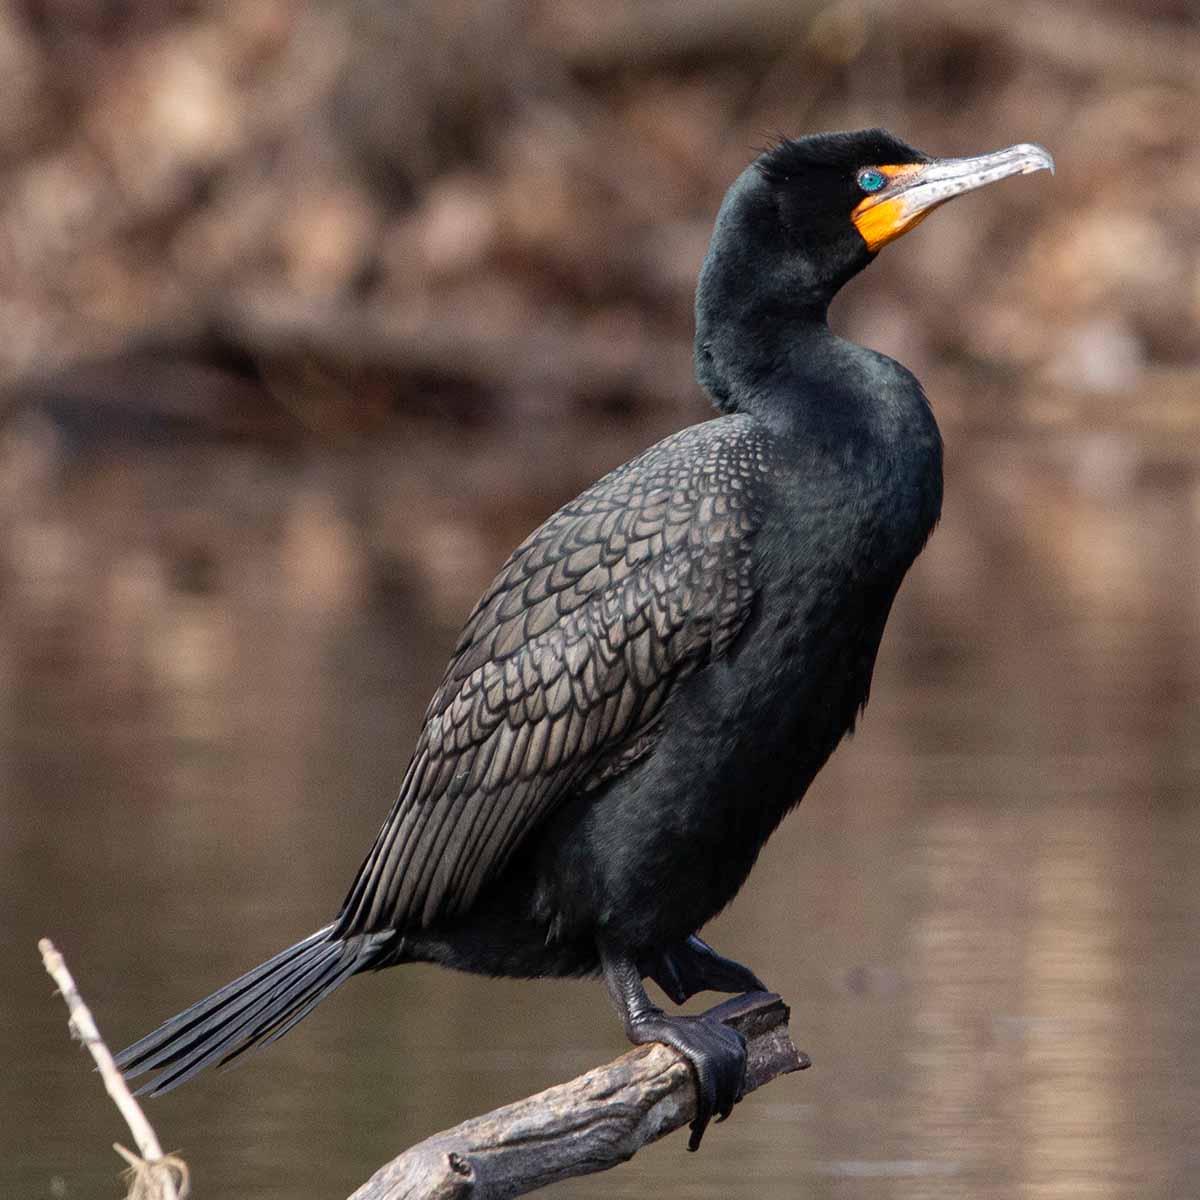 The image shows a double-crested cormorant perched at the very end of a branch that is hanging over a body of water, likely a pond or lake. The cormorant is captured in profile, allowing the viewer to clearly see its somewhat long, slender neck, hooked beak, and dark, iridescent feathers. Its similarly black webbed feet are gripping a old dried-out branch, keeping it balanced as it surveys the water below. The cormorant's wings are folded neatly against its body, rather than spread out to dry, suggesting it may have just finished a dive or swim in the pond. The blurred, out-of-focus water in the background provides context for the bird's typical wetland habitat. This profile view highlights the cormorant's streamlined, adapted features for its aquatic lifestyle, while its precarious perch on the branch's end adds a sense of drama and tension to the scene.
